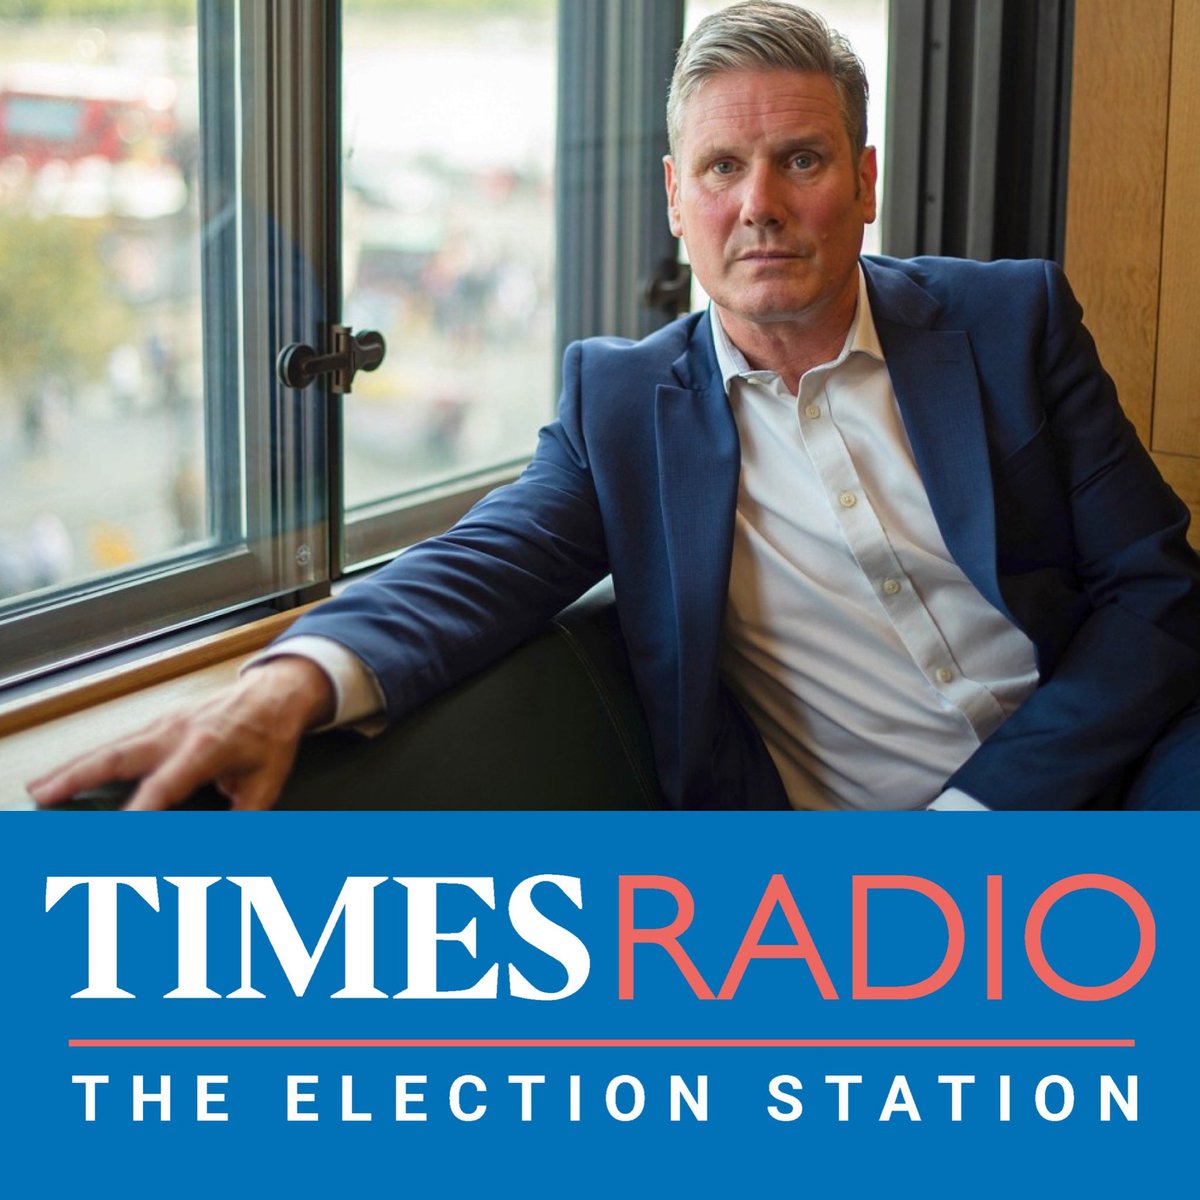 Tomorrow morning on @TimesRadio Breakfast with @Chloetilley and @CalumAM the man who wants to boot Rishi Sunak out of Number 10. Listen to Keir Starmer from 7am. #GeneralElection #KeirStarmer #Labour #TimesRadio